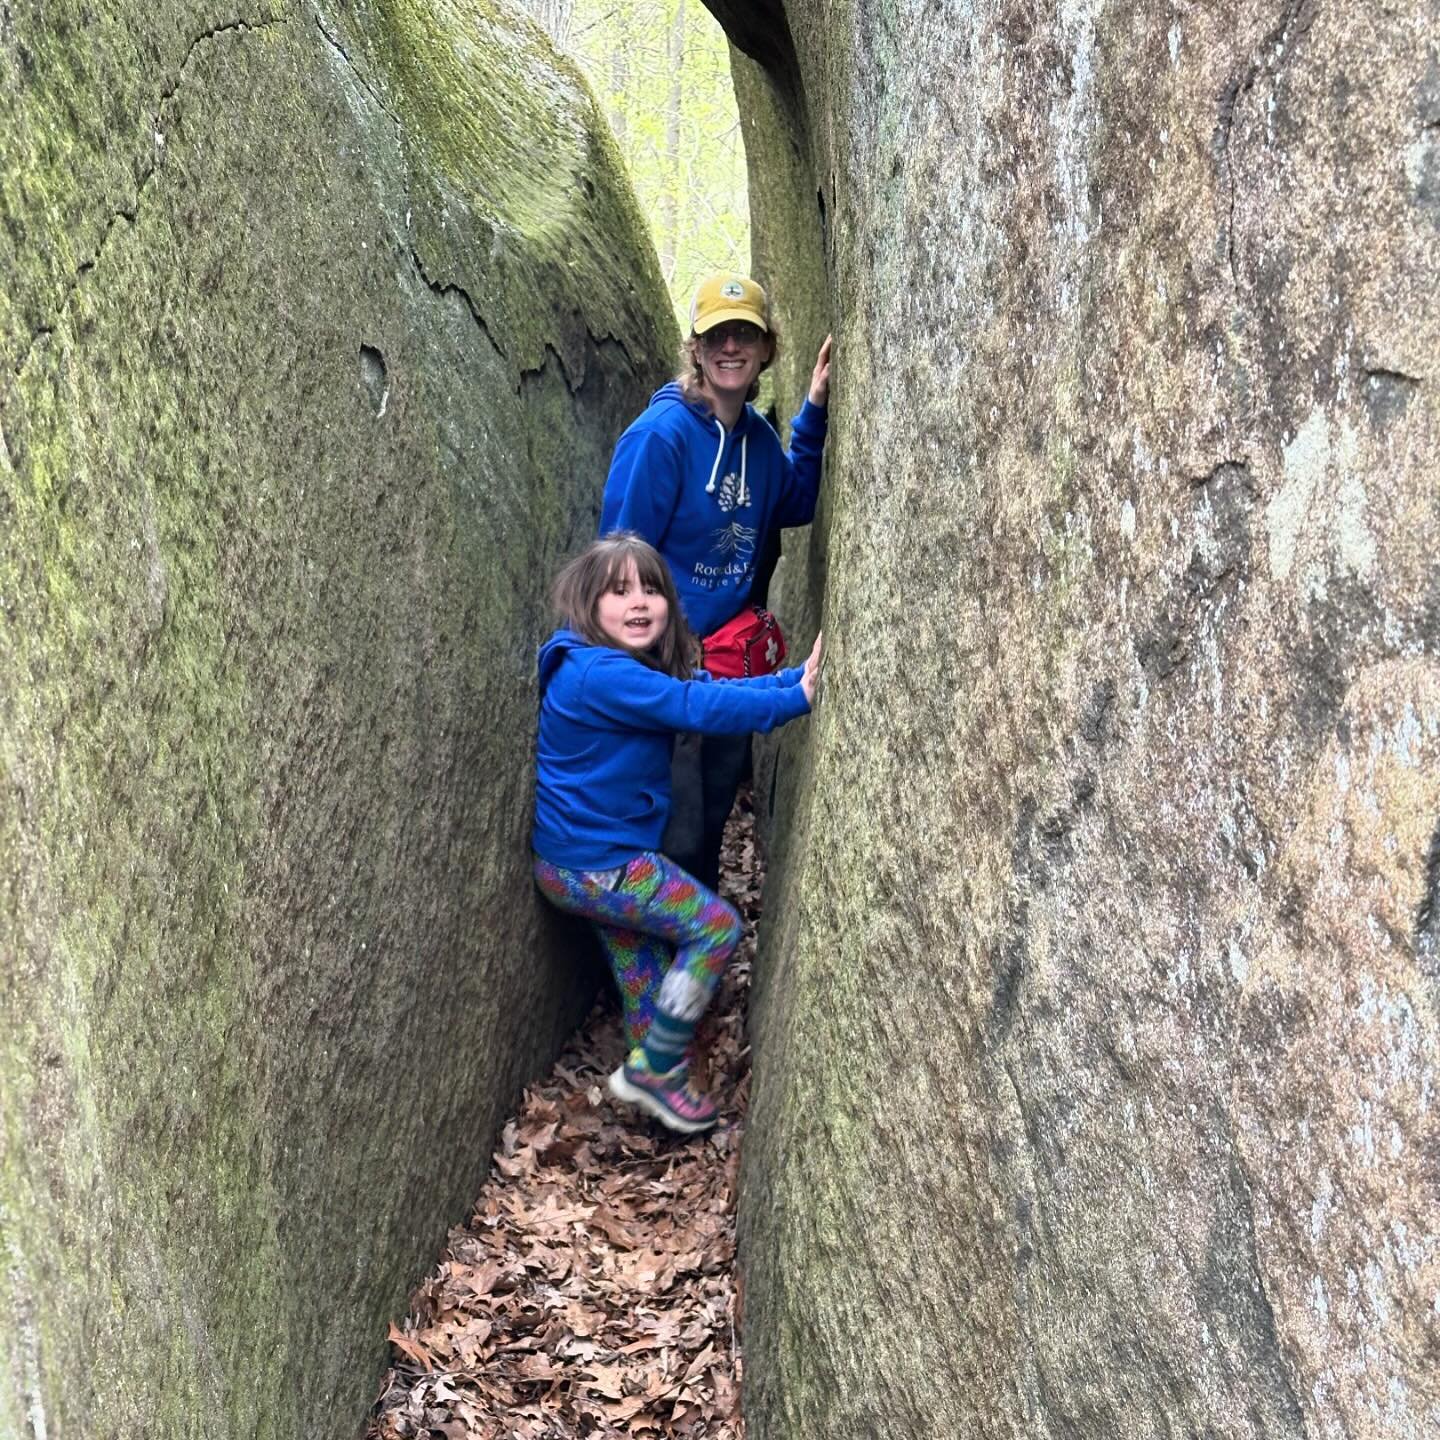 (2/2) Today we got to spend time at one of our favorite places - Buzzard&rsquo;s Rock! We left right away to spend as much time there as possible, and had fun moving along the paths that are much greener than they were during our last trip there this